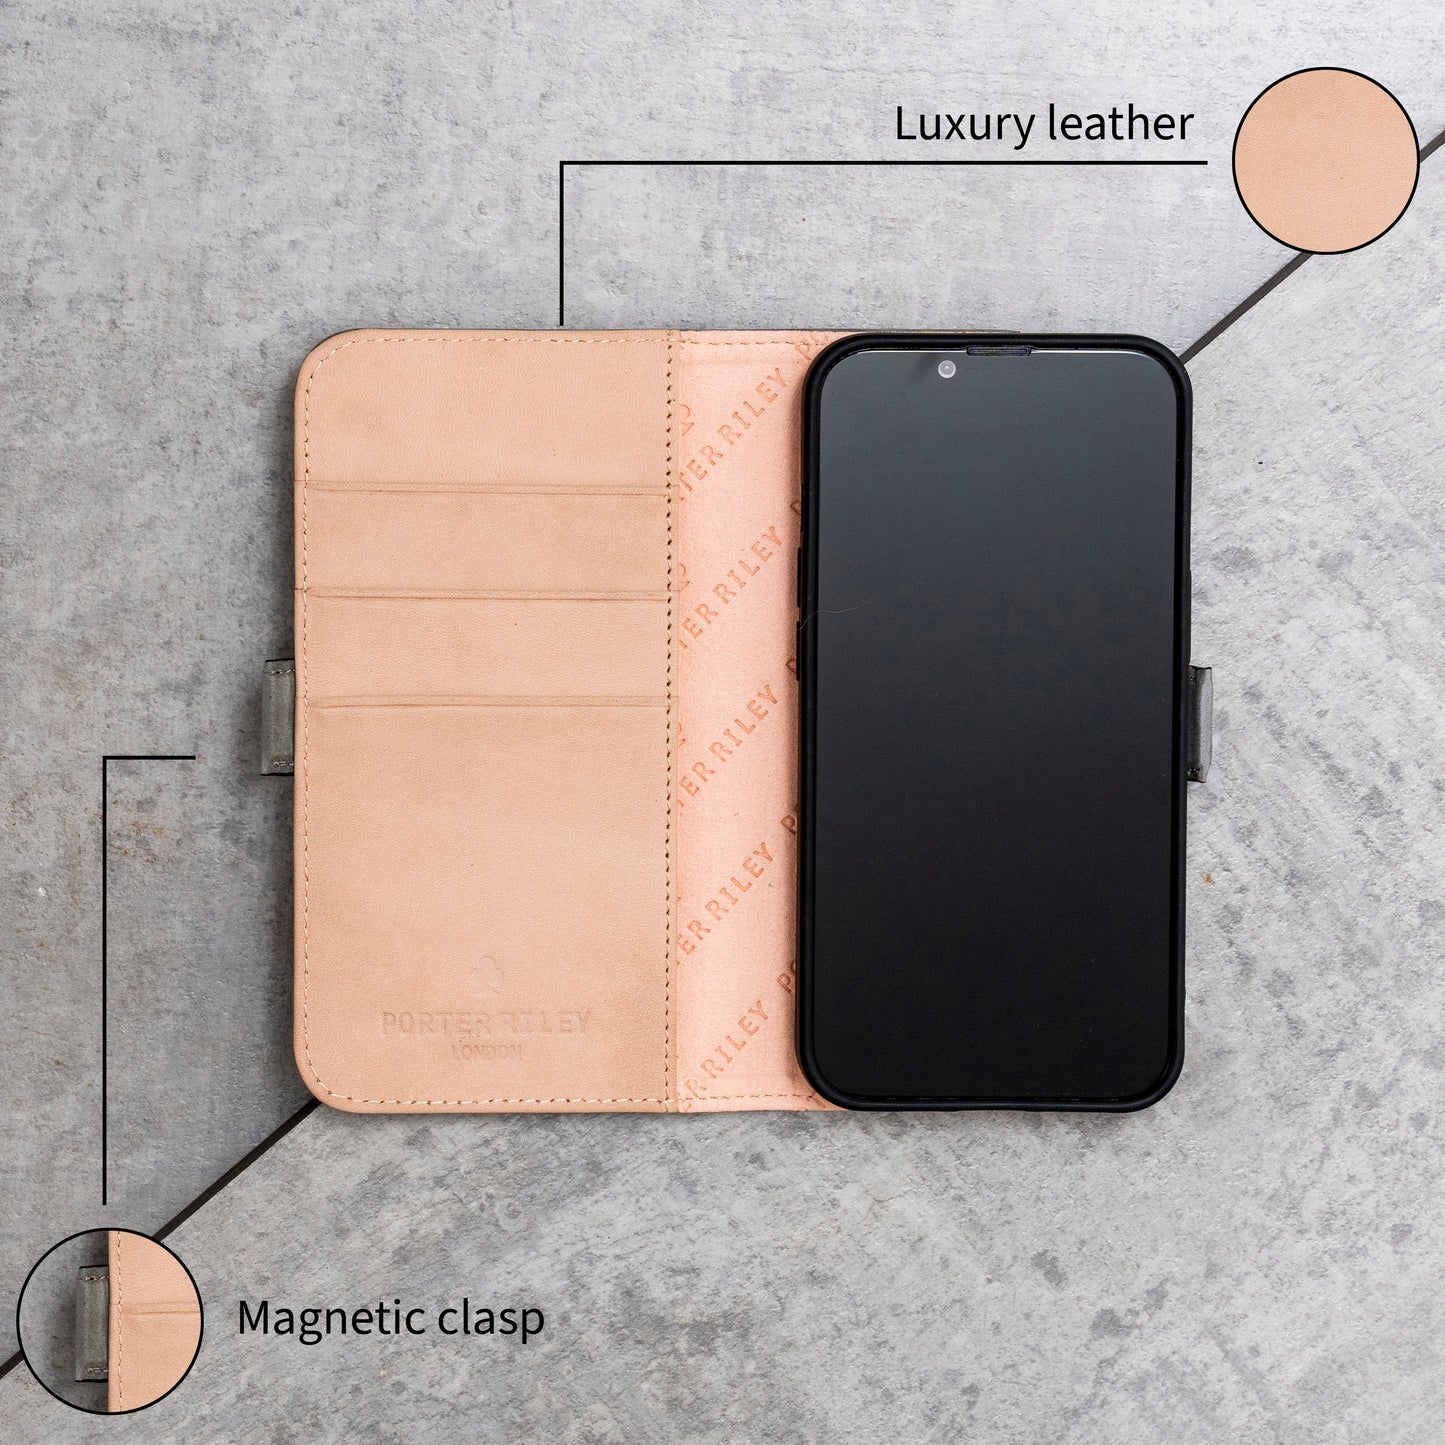 iPhone X / iPhone XS Leather Case. Premium Nubuck Genuine Leather Stand Case/Cover/Wallet (Grey, Pink)